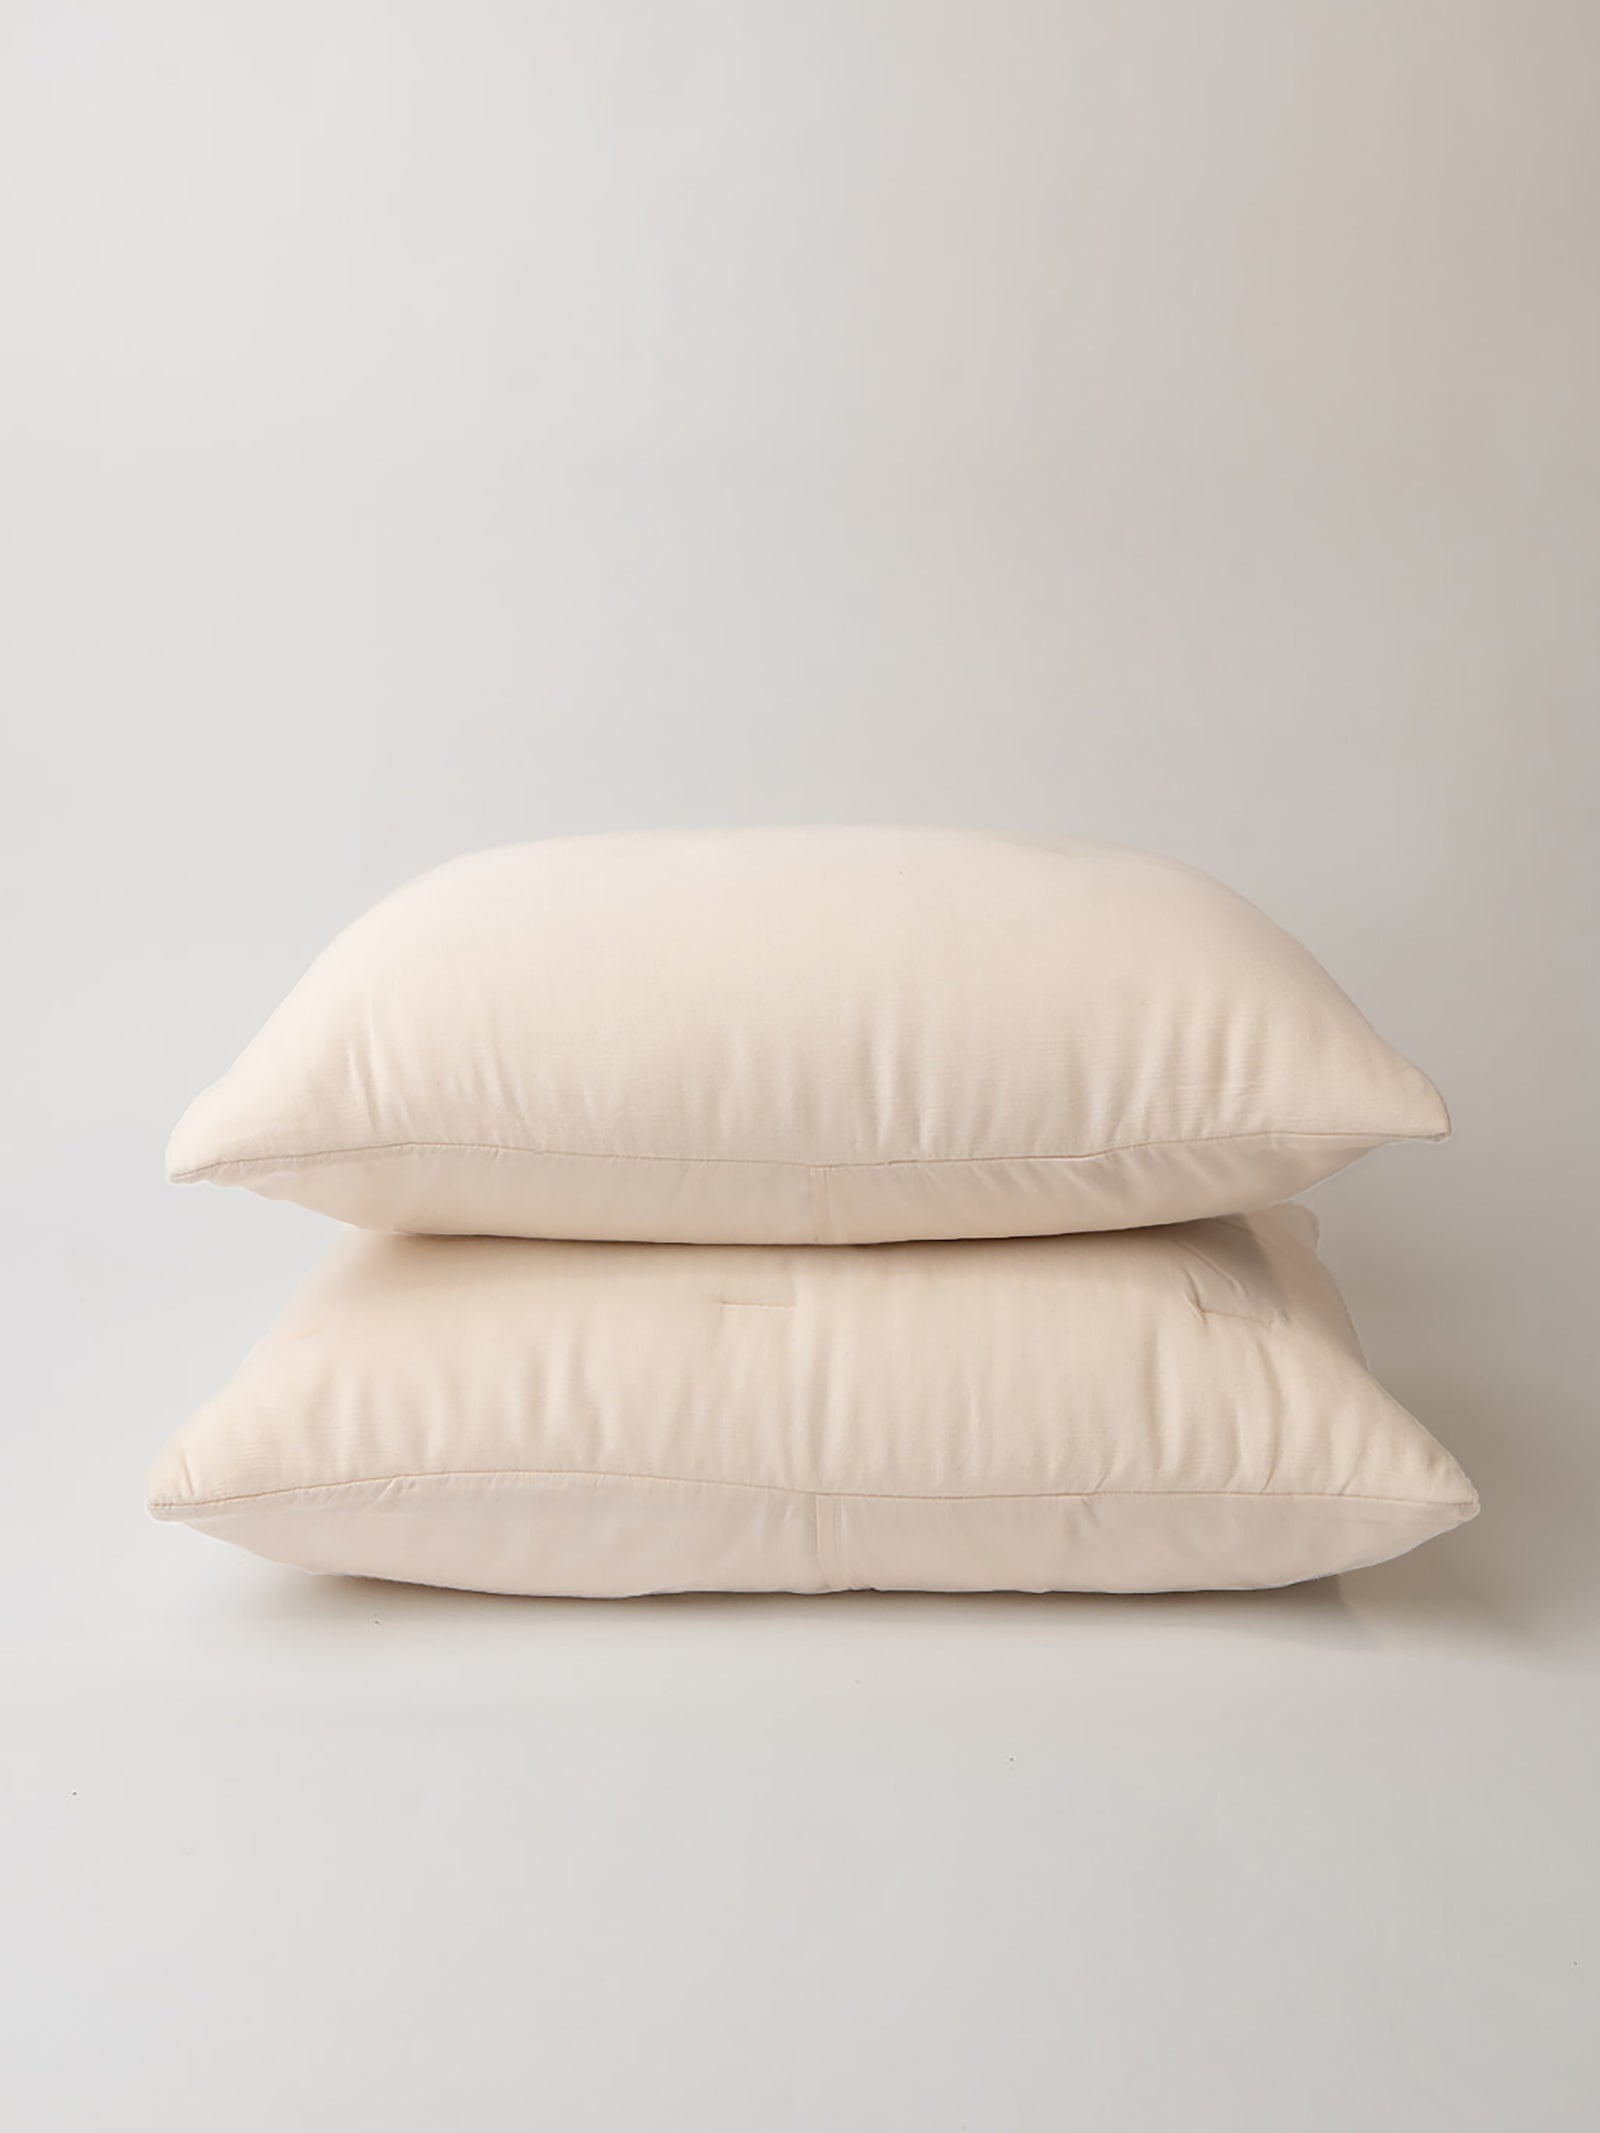 Buttermilk Aire Bamboo Puckered Shams standard size. The sham photographed with a white background